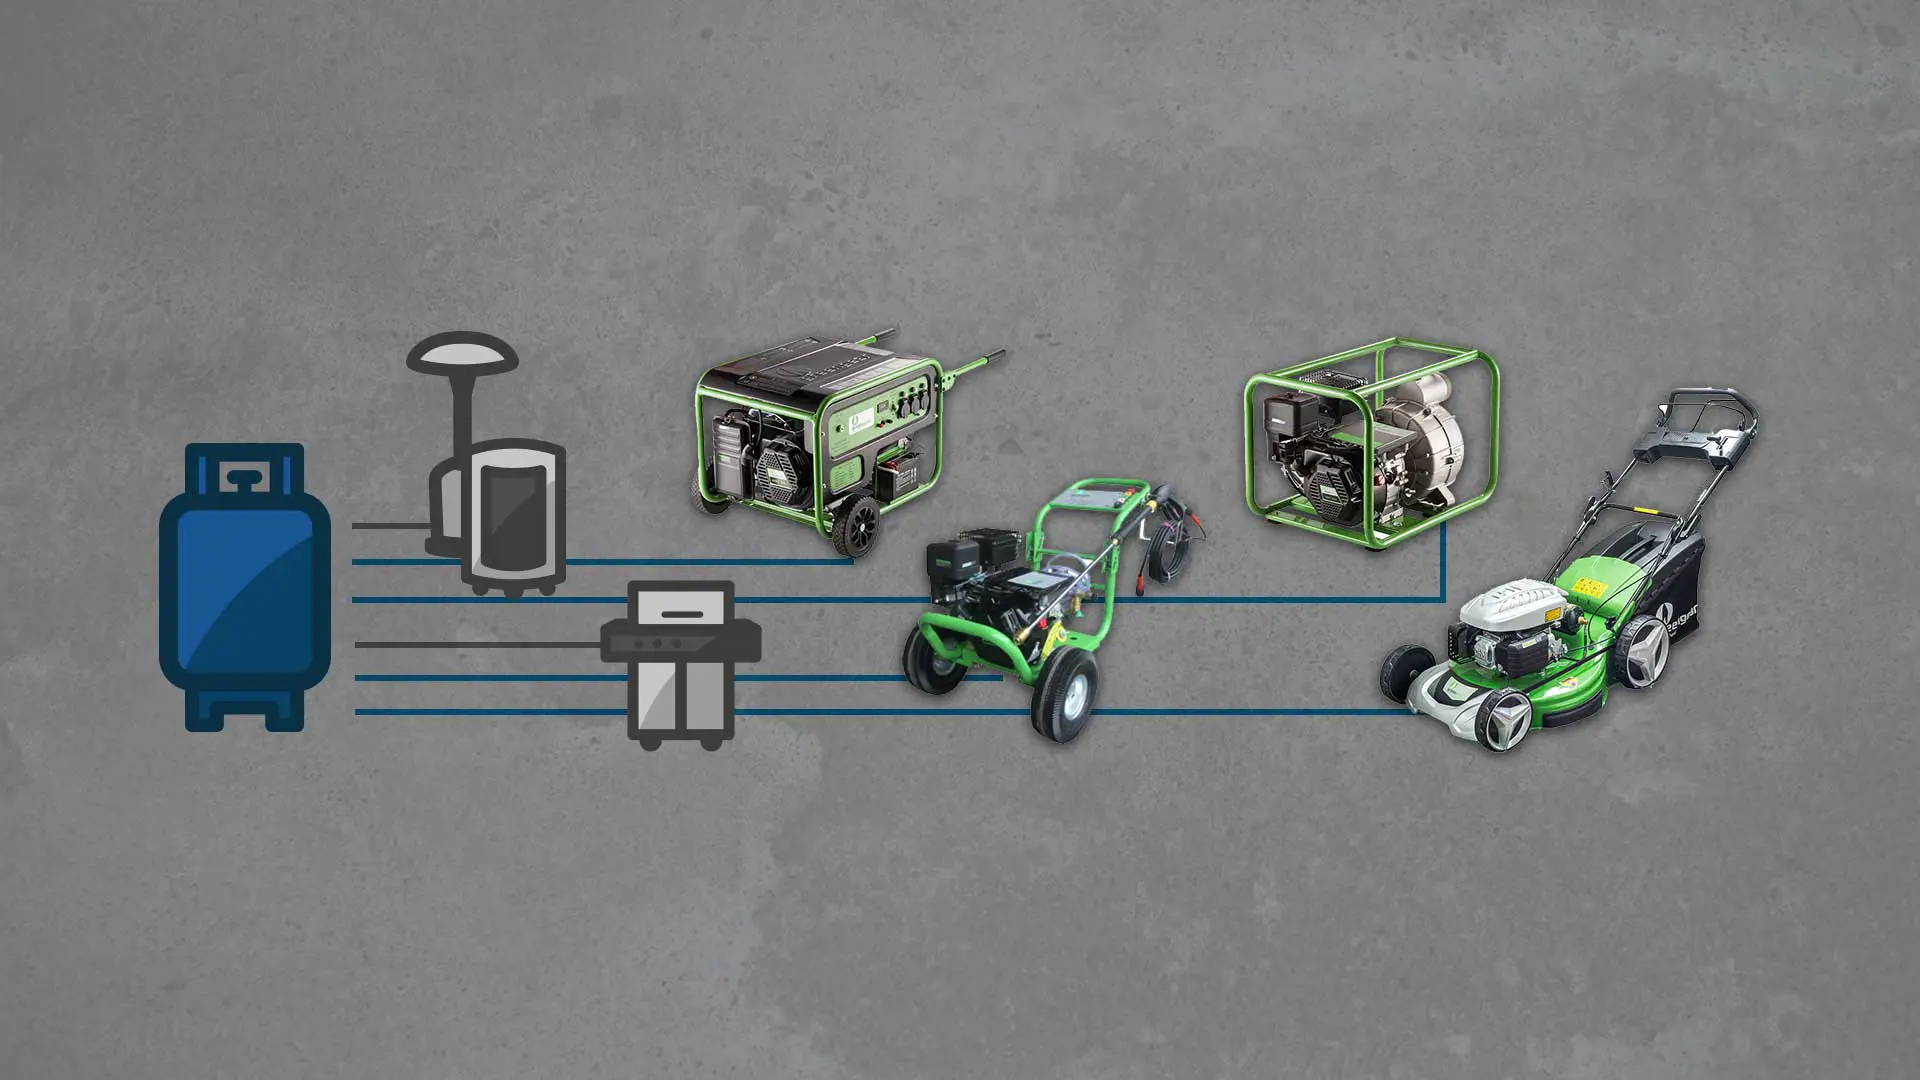 Graphic showing various Greengear products